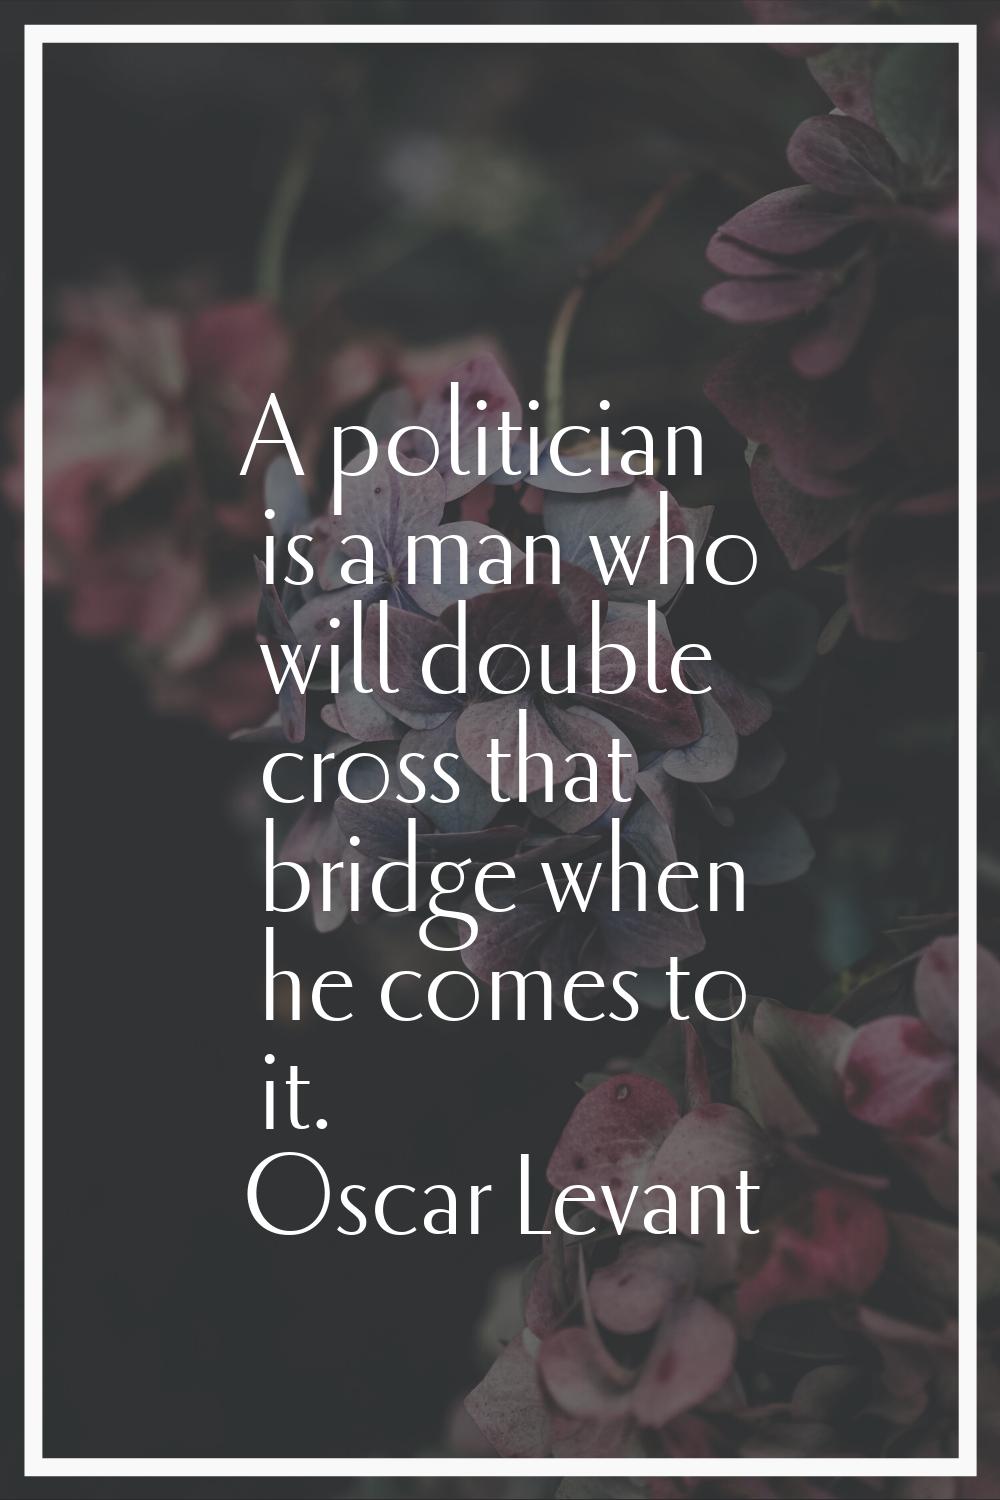 A politician is a man who will double cross that bridge when he comes to it.